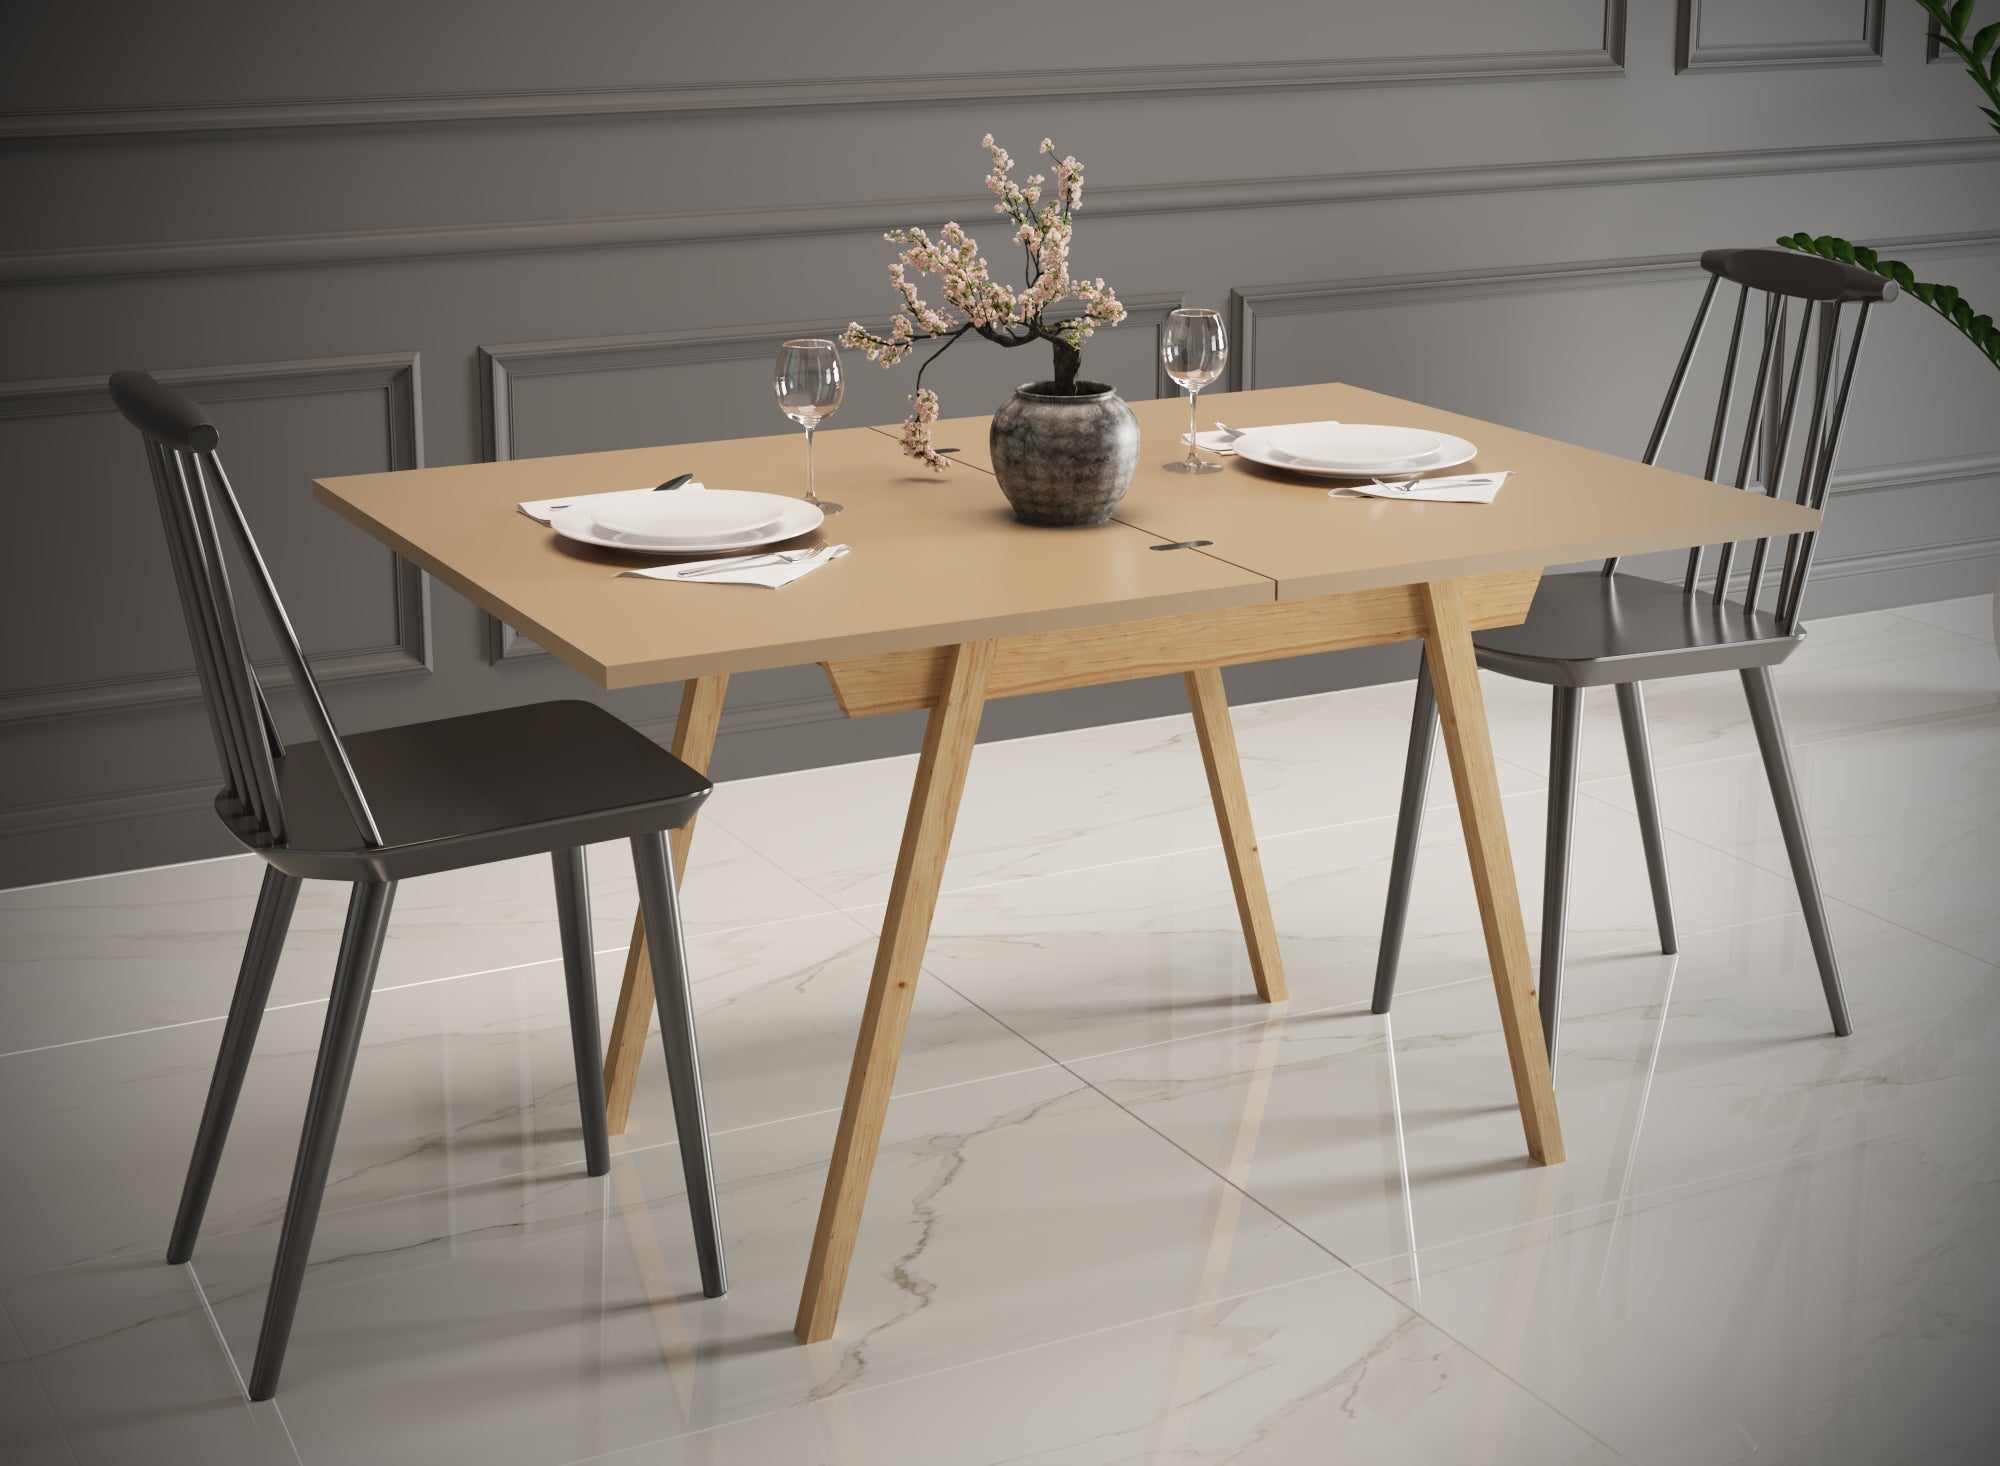 Ottara Creme Extendable Dining Table with Storage